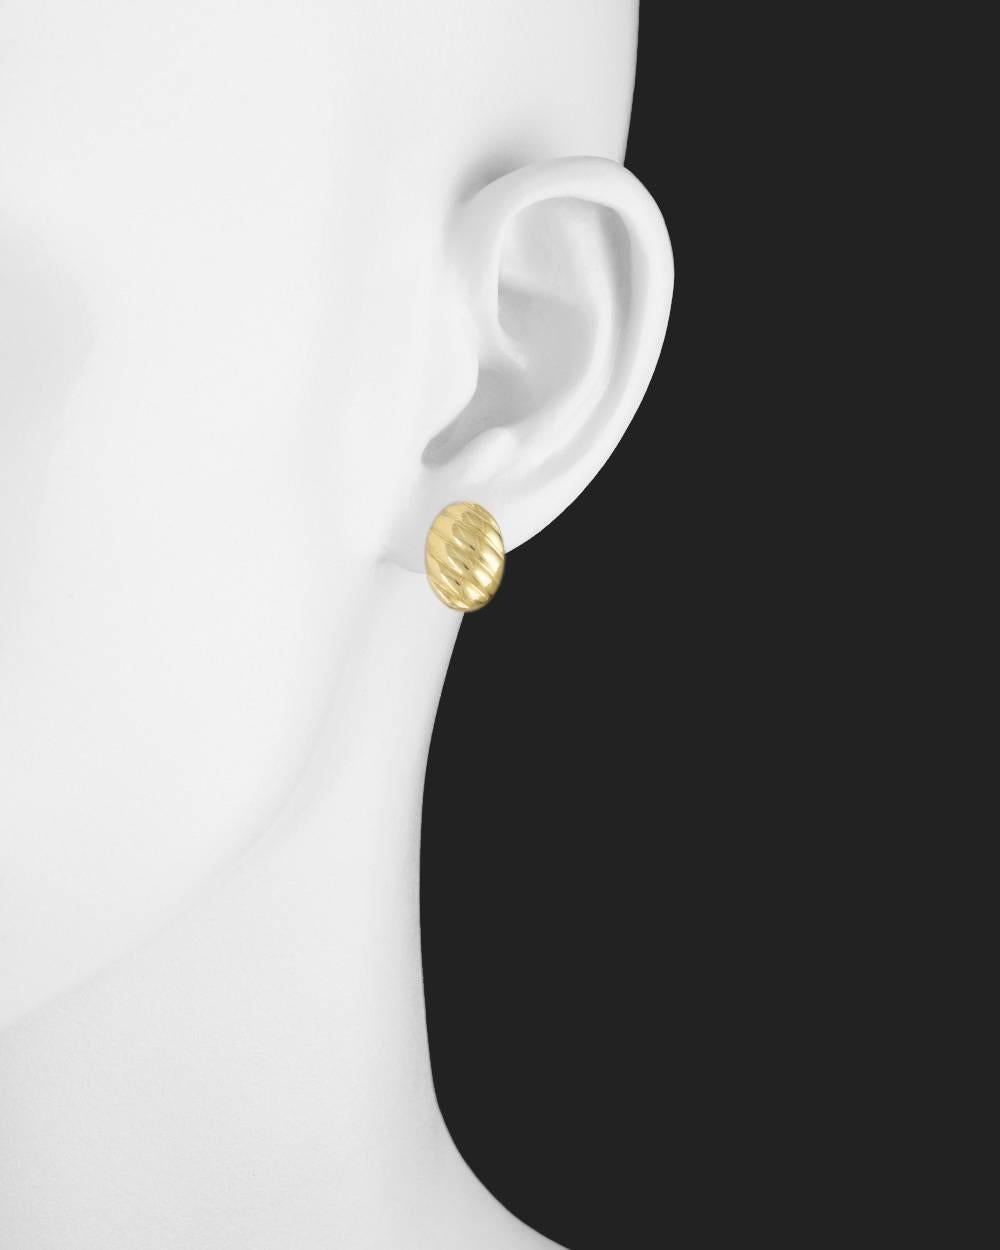 Small earclips, fashioned in delicately fluted 18k yellow gold. Omega-style clip backs.
